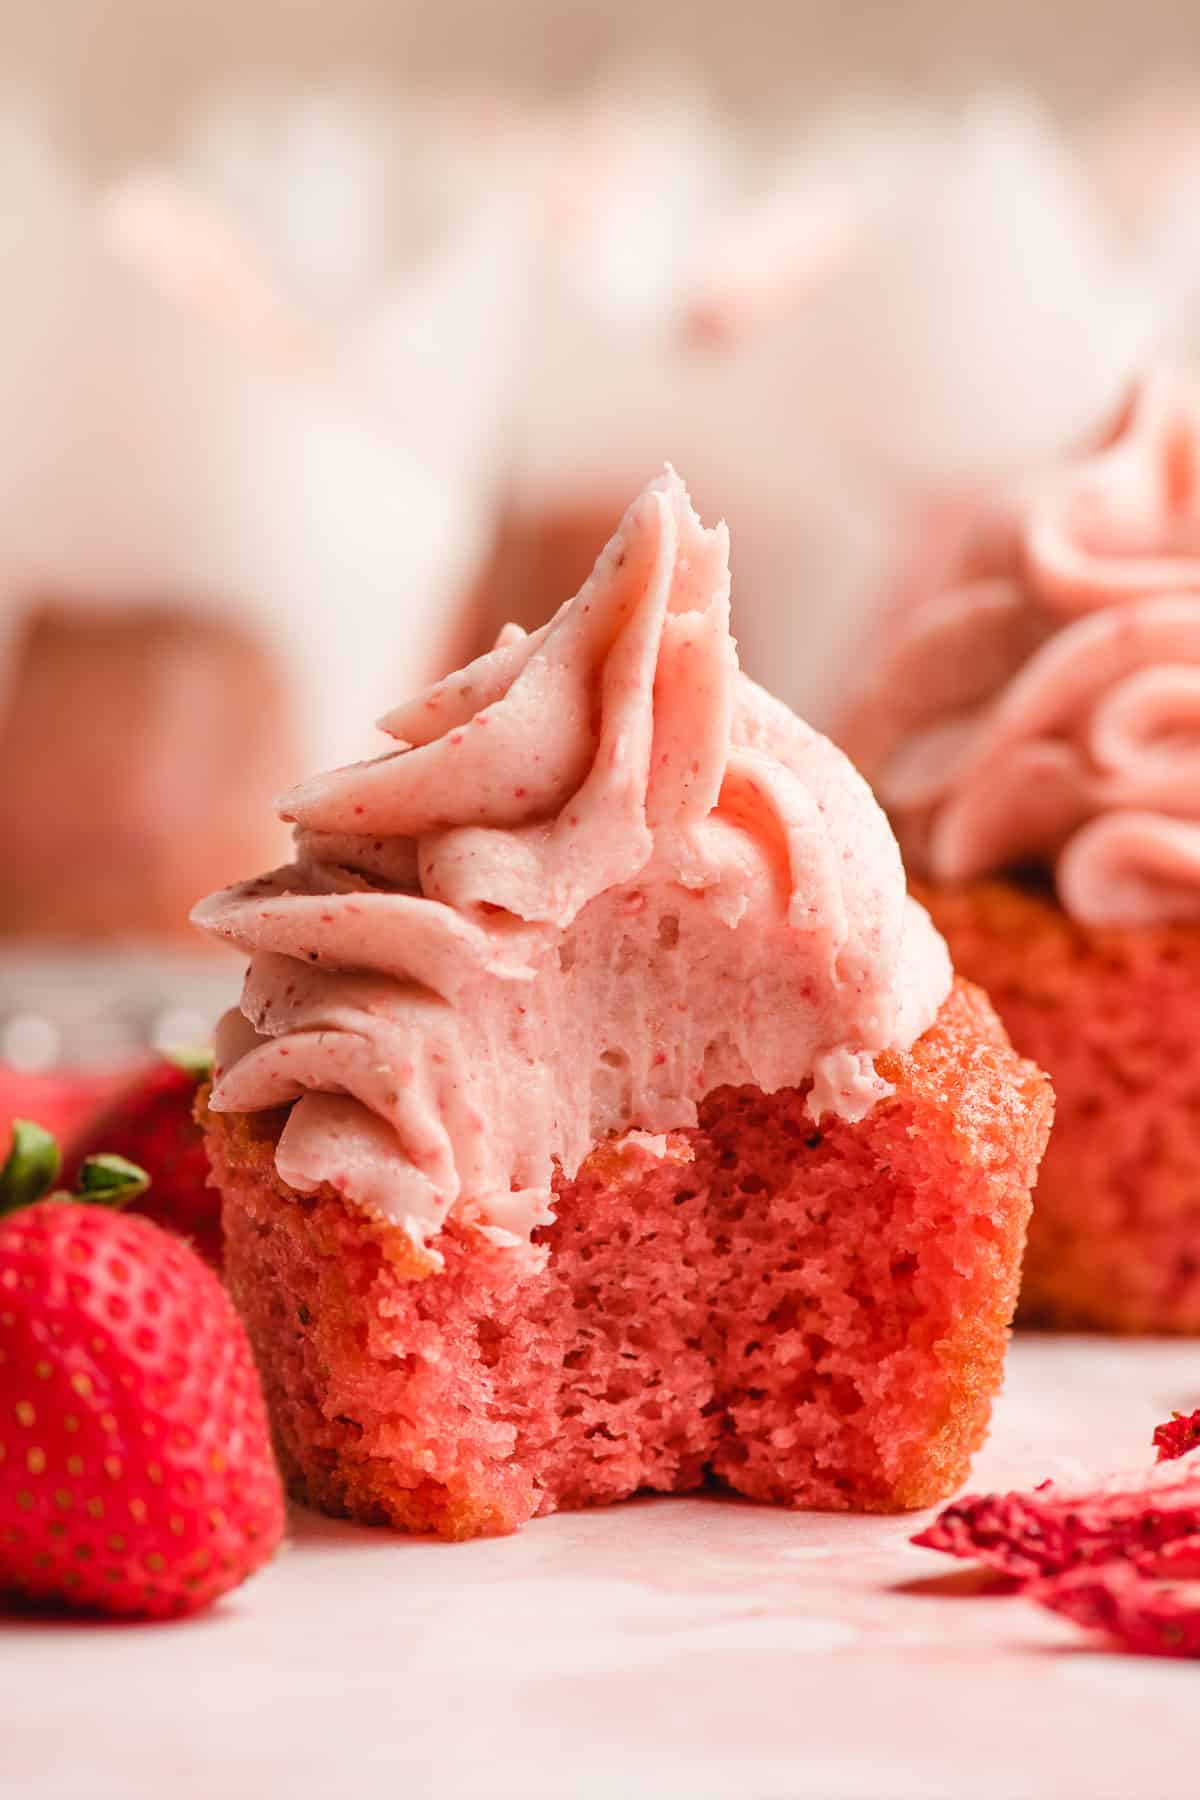 Strawberry cupcake with a big bite taken out of it.